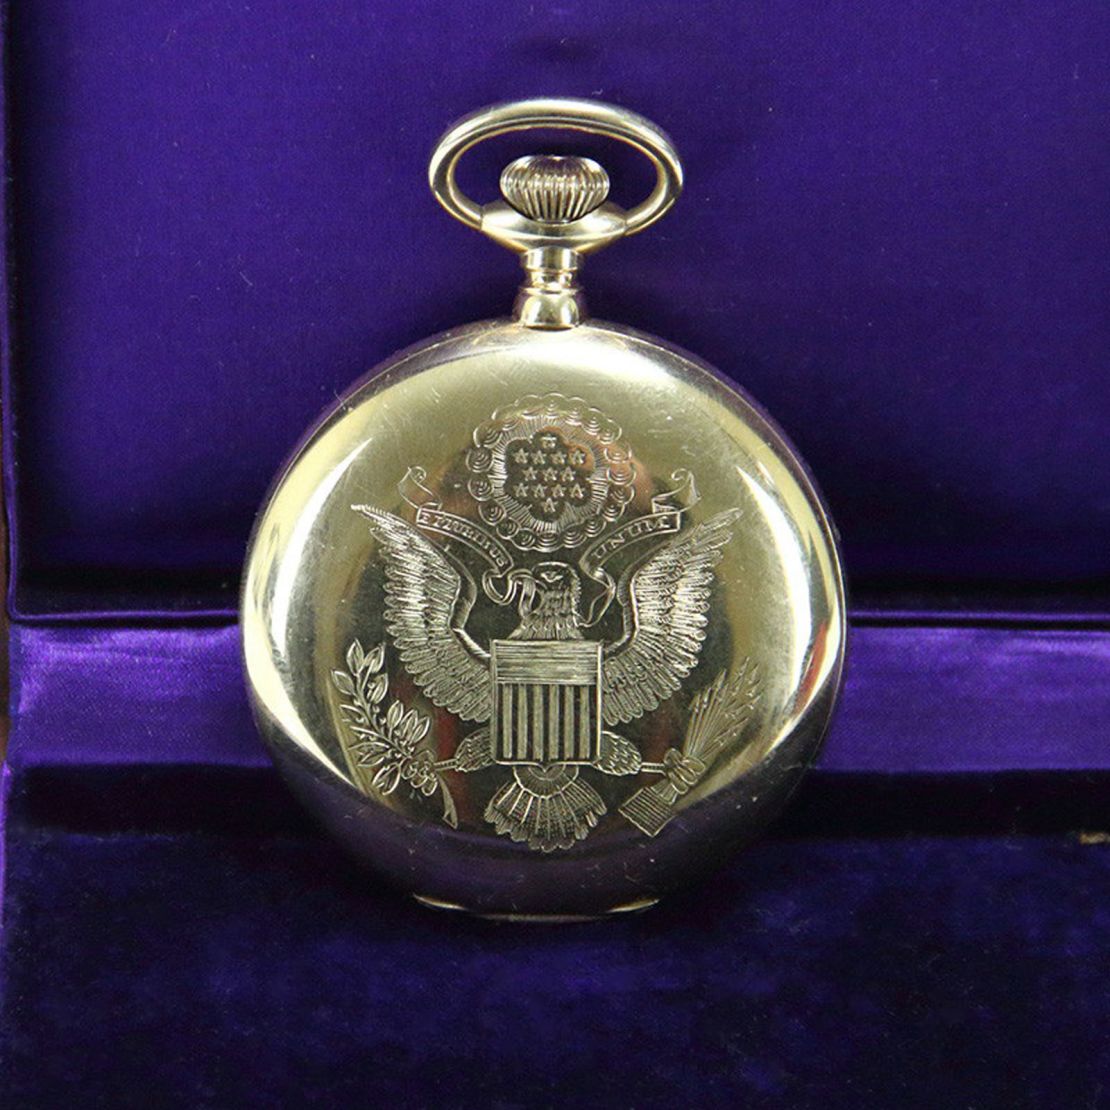 The front of the watch carries an embossed Great Seal.